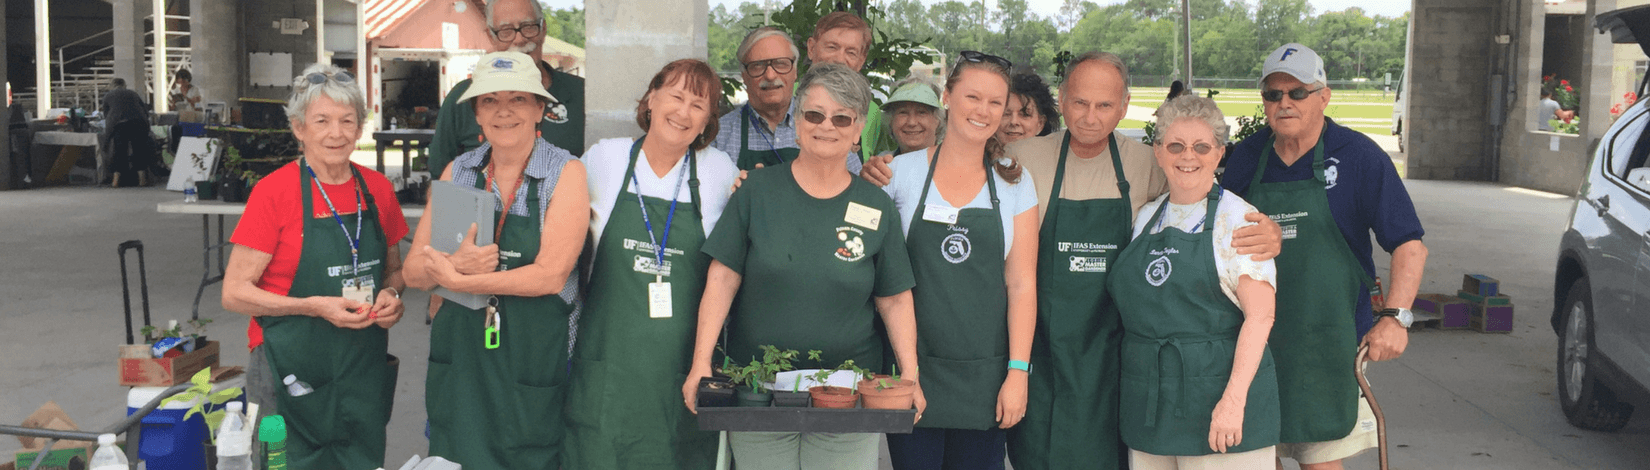 Master Gardeners at plant sale